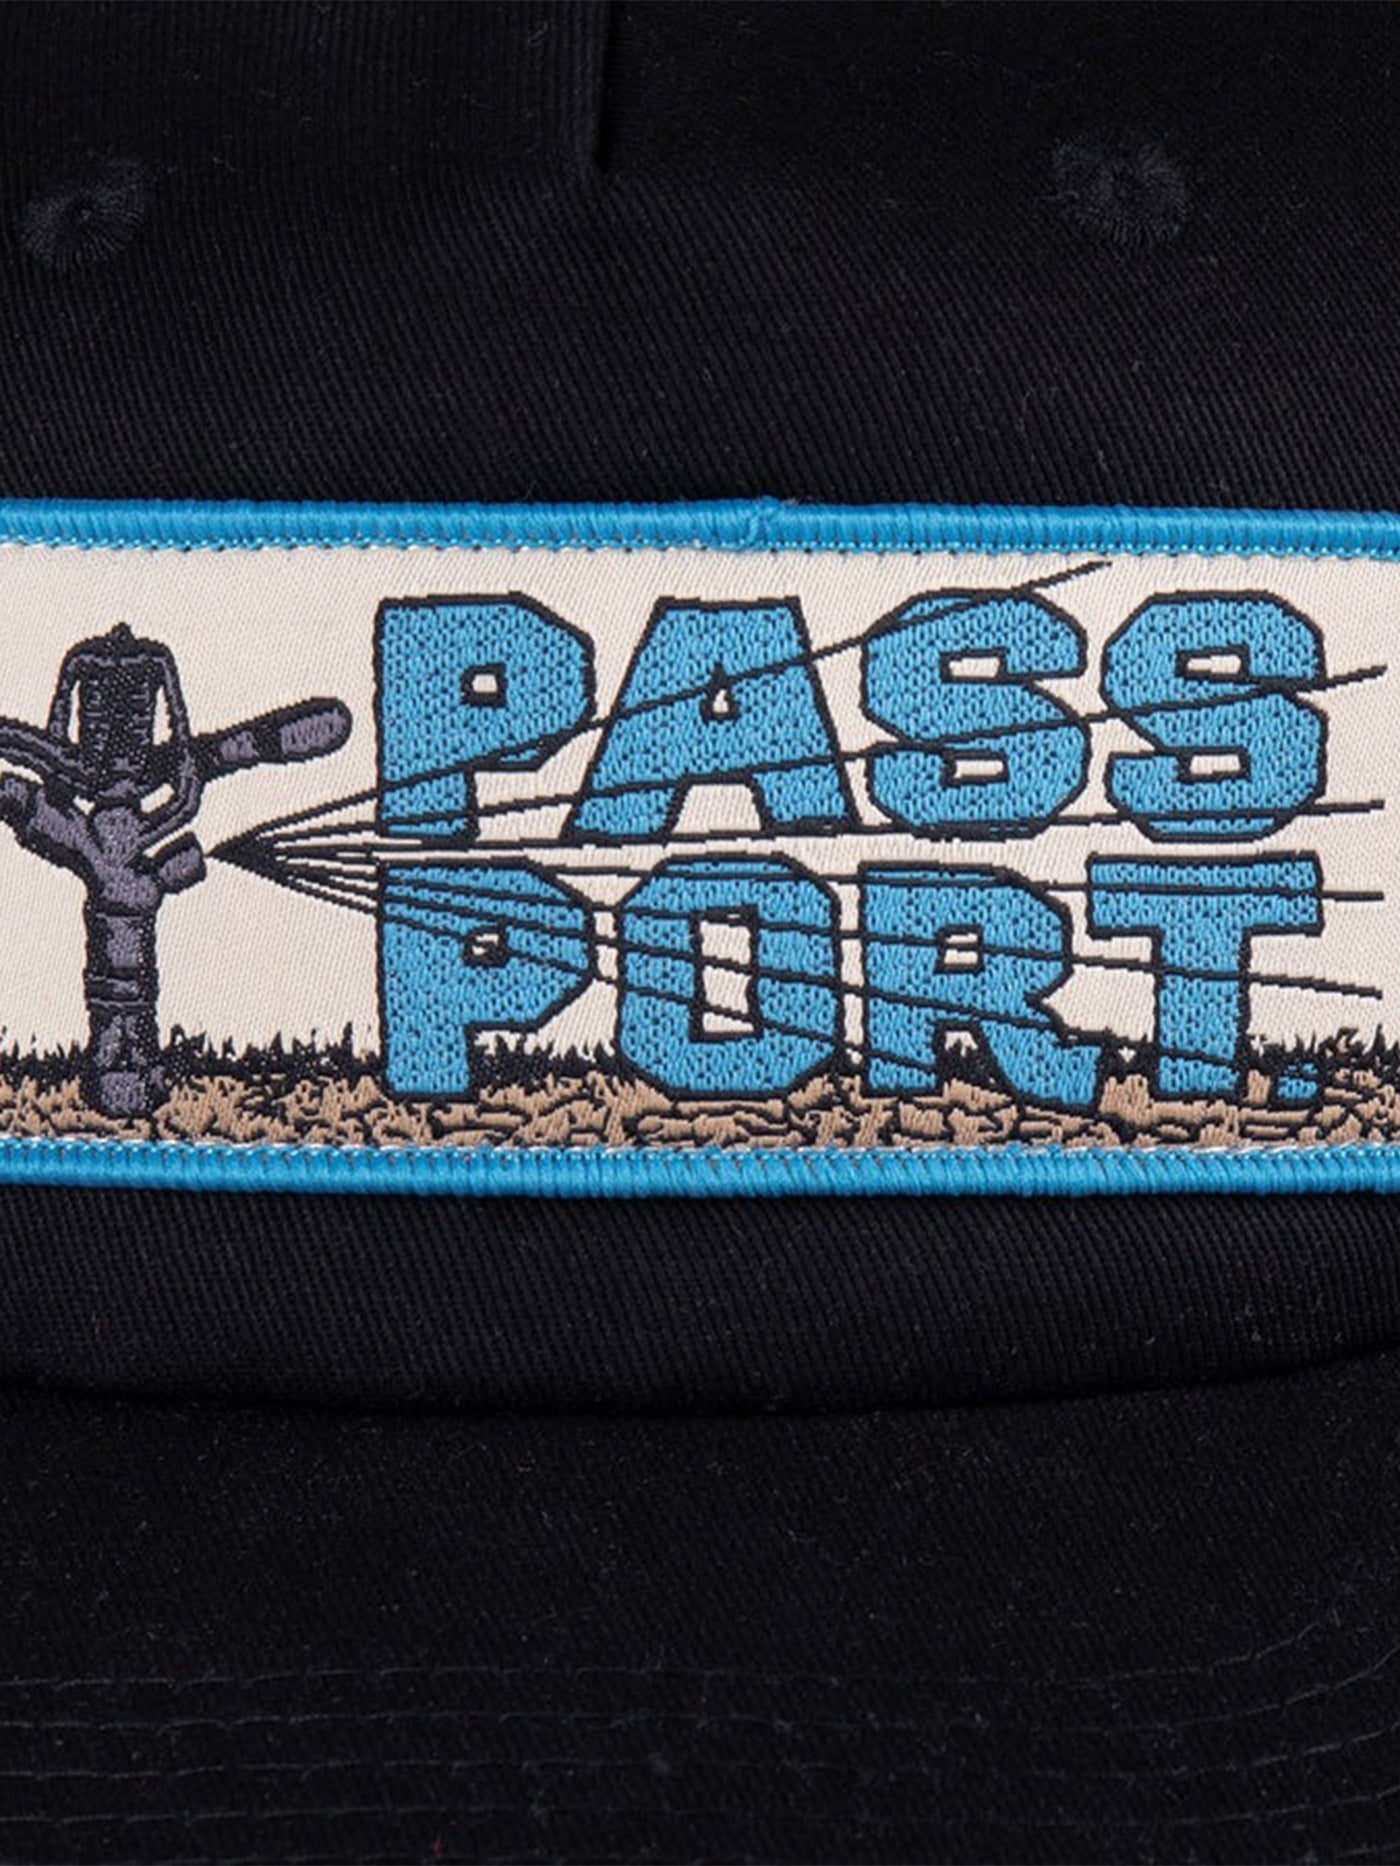 Pass Port Water Restrictions Workers Trucker Hat